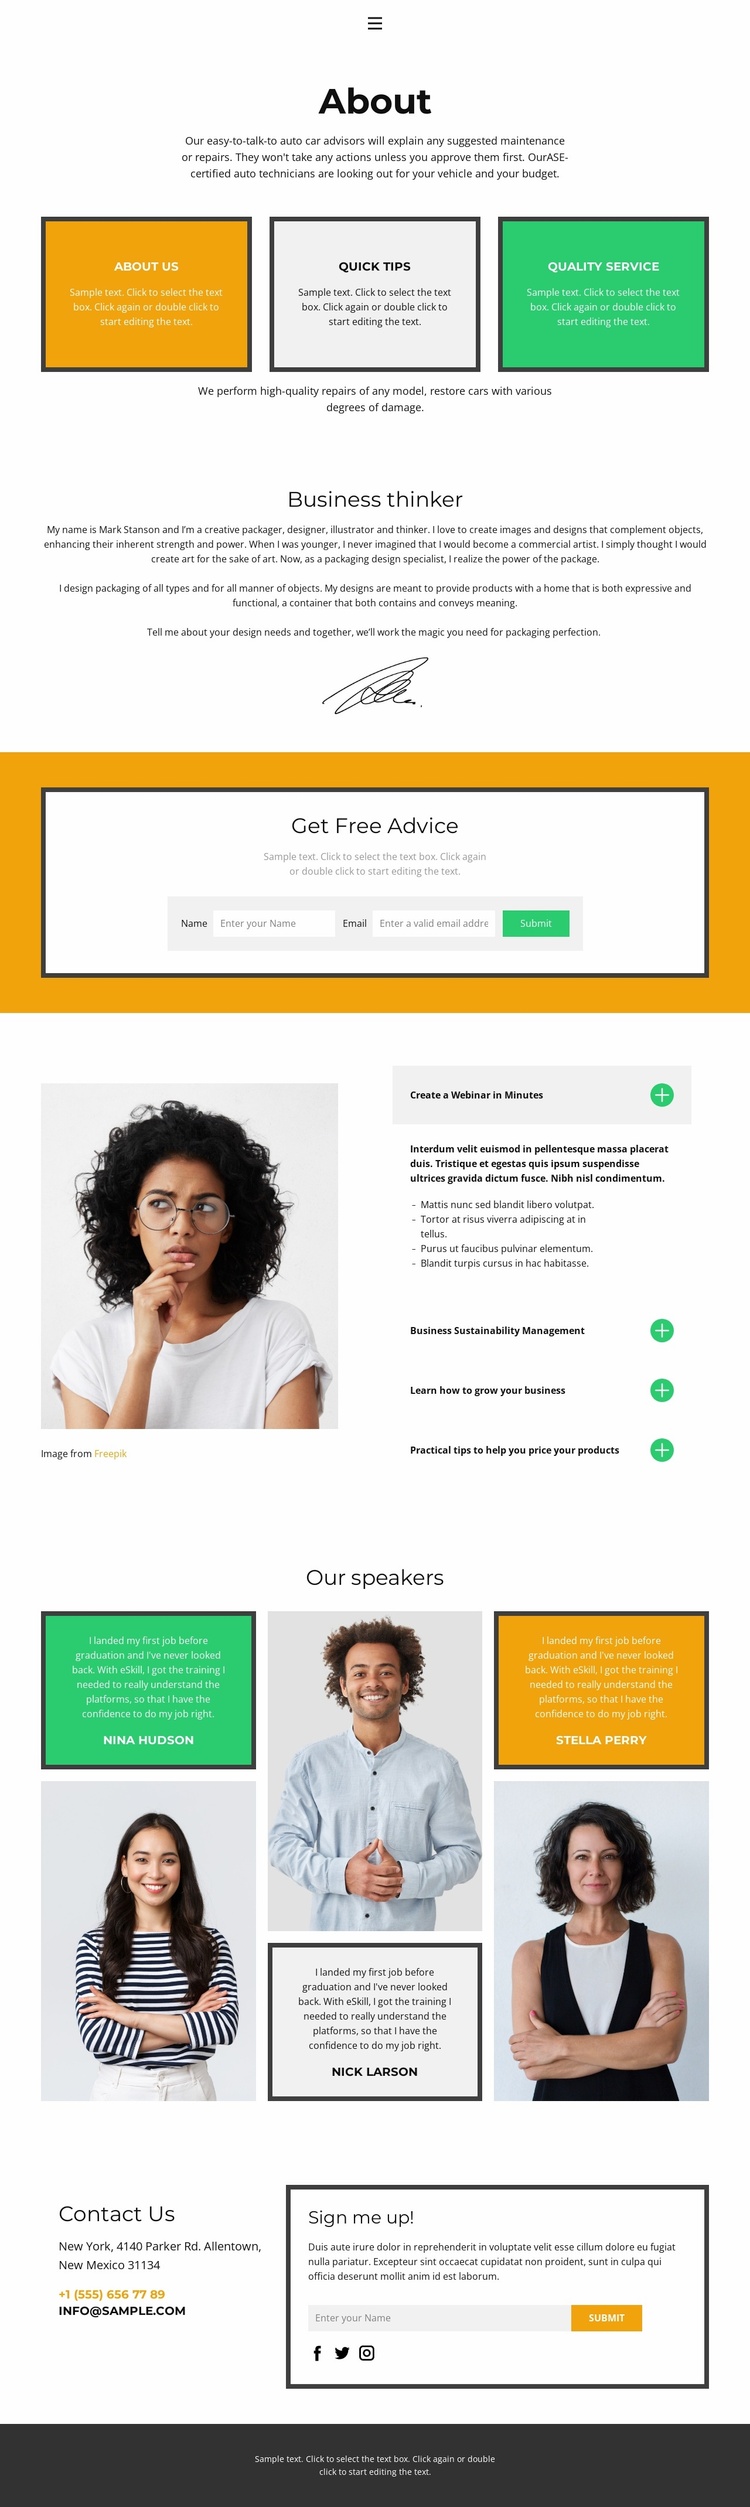 Read and find answers Website Template